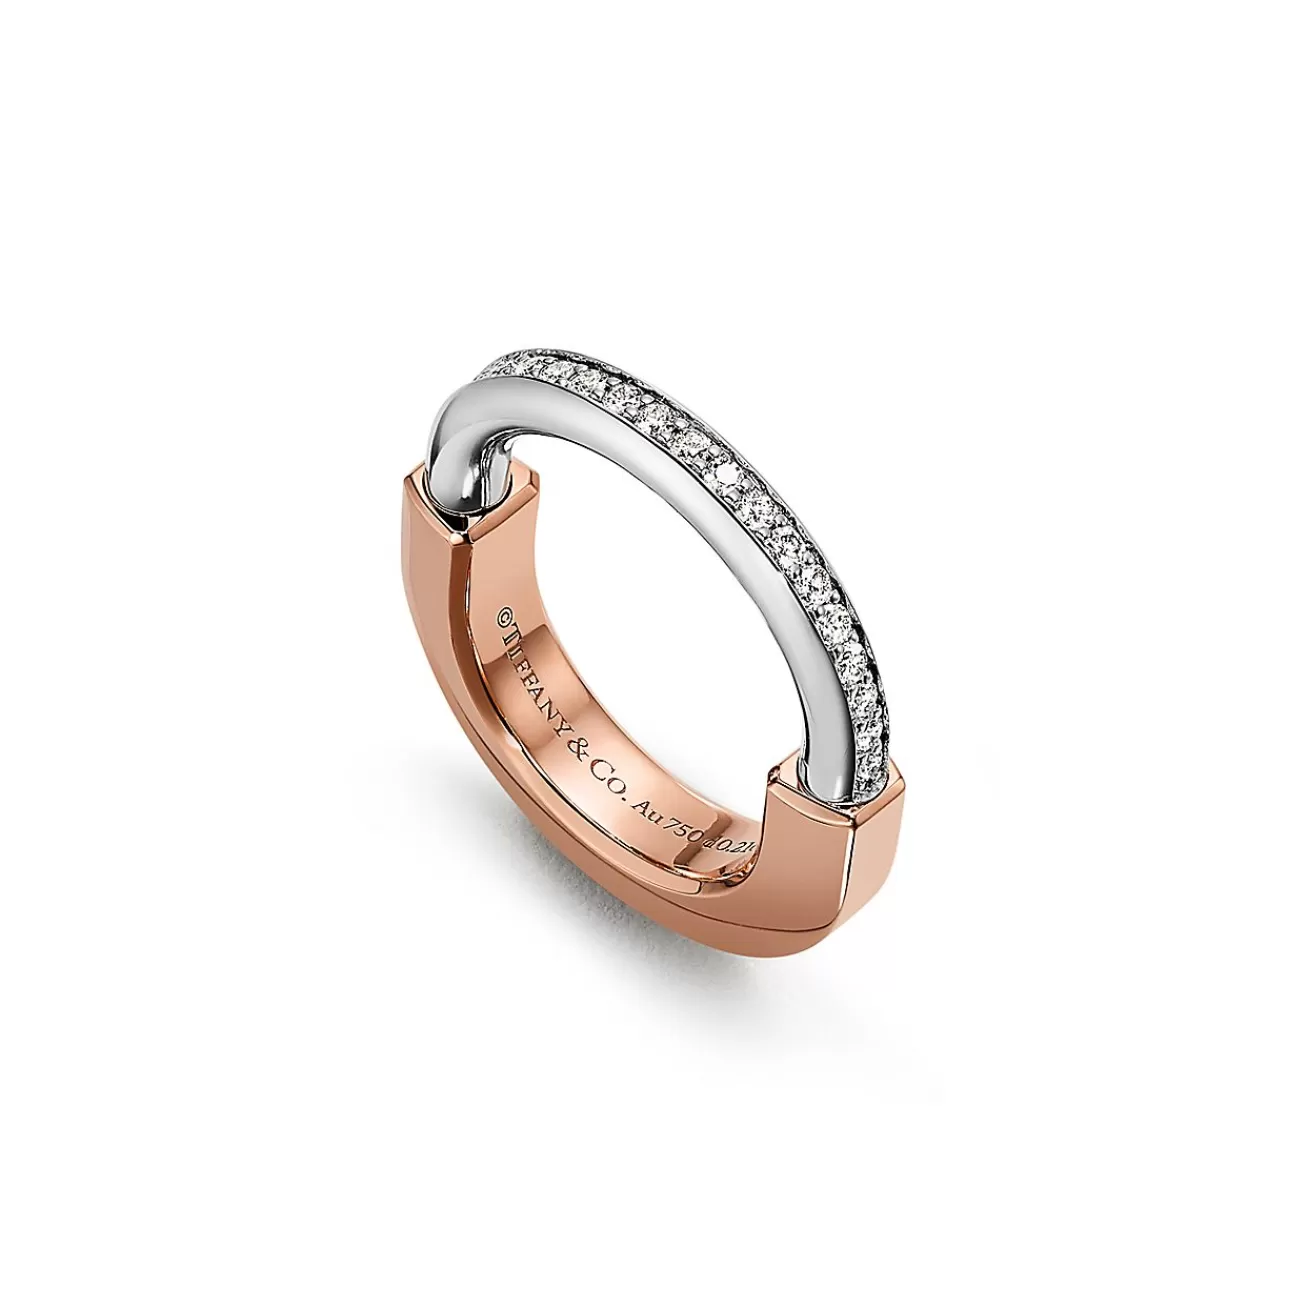 Tiffany & Co. Tiffany Lock Ring in Rose and White Gold with Diamonds | ^ Rings | Stacking Rings